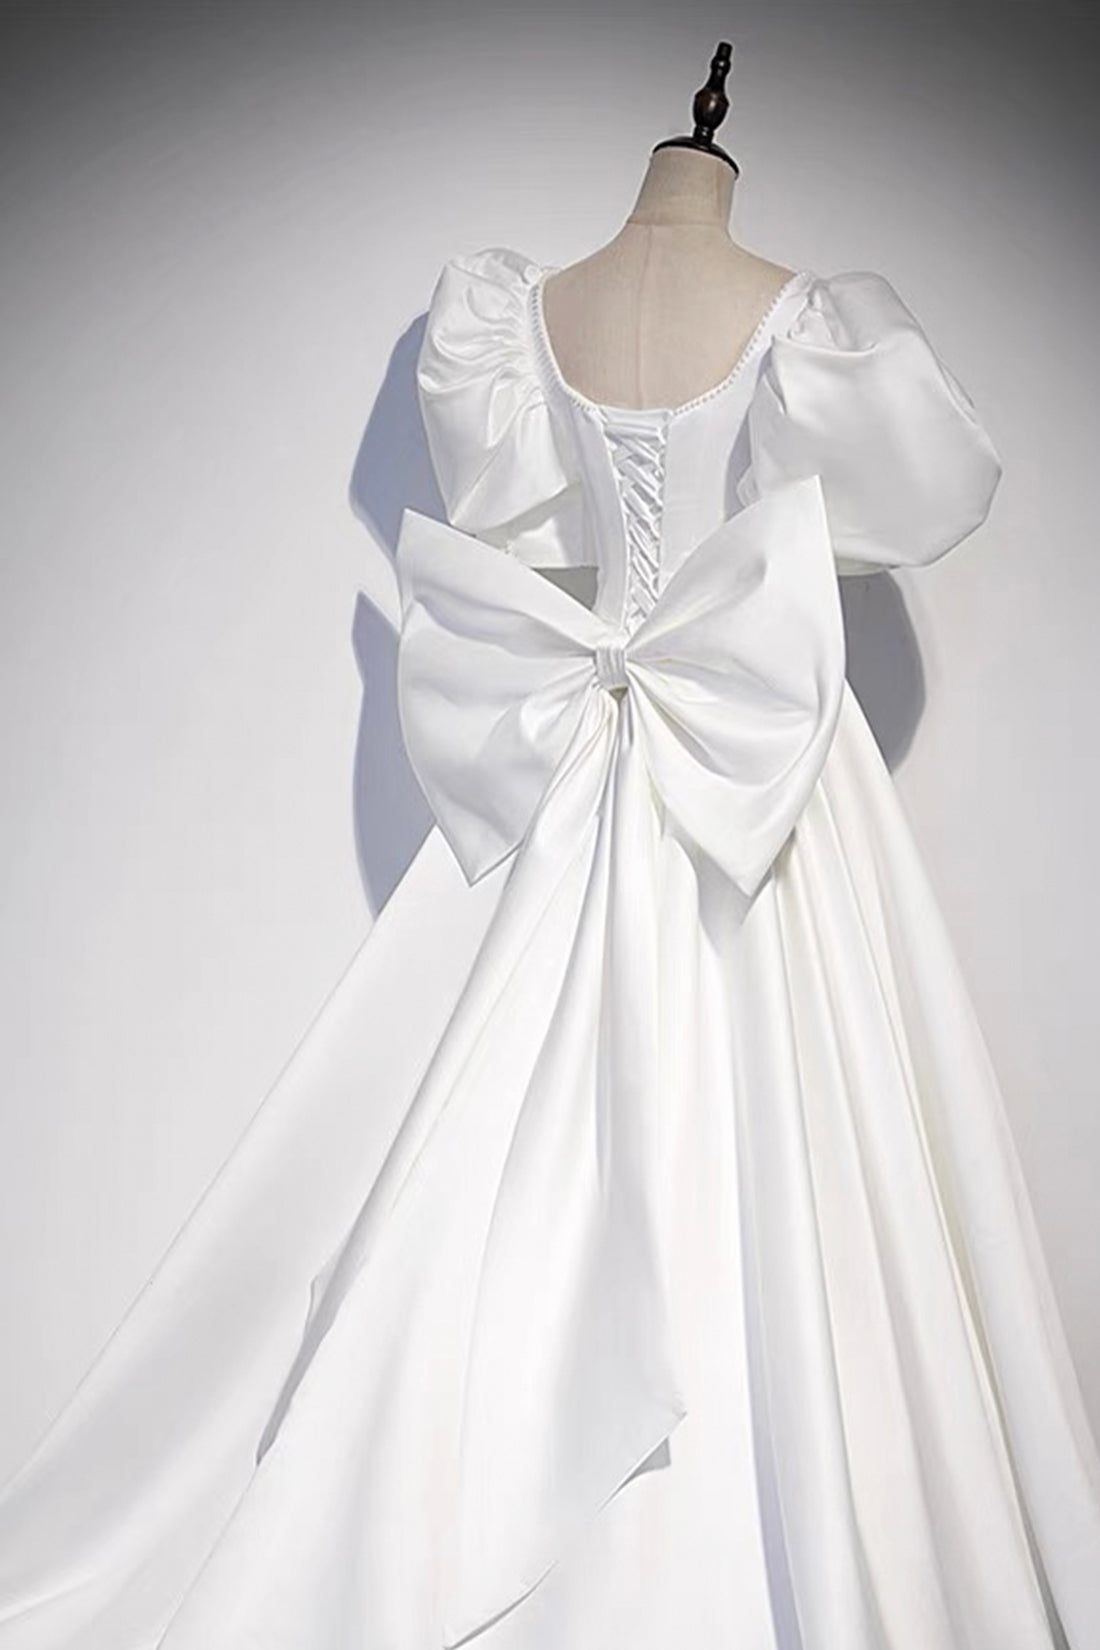 White Satin Long Prom Dress, Beautiful Short Sleeve Evening Dress with Bow